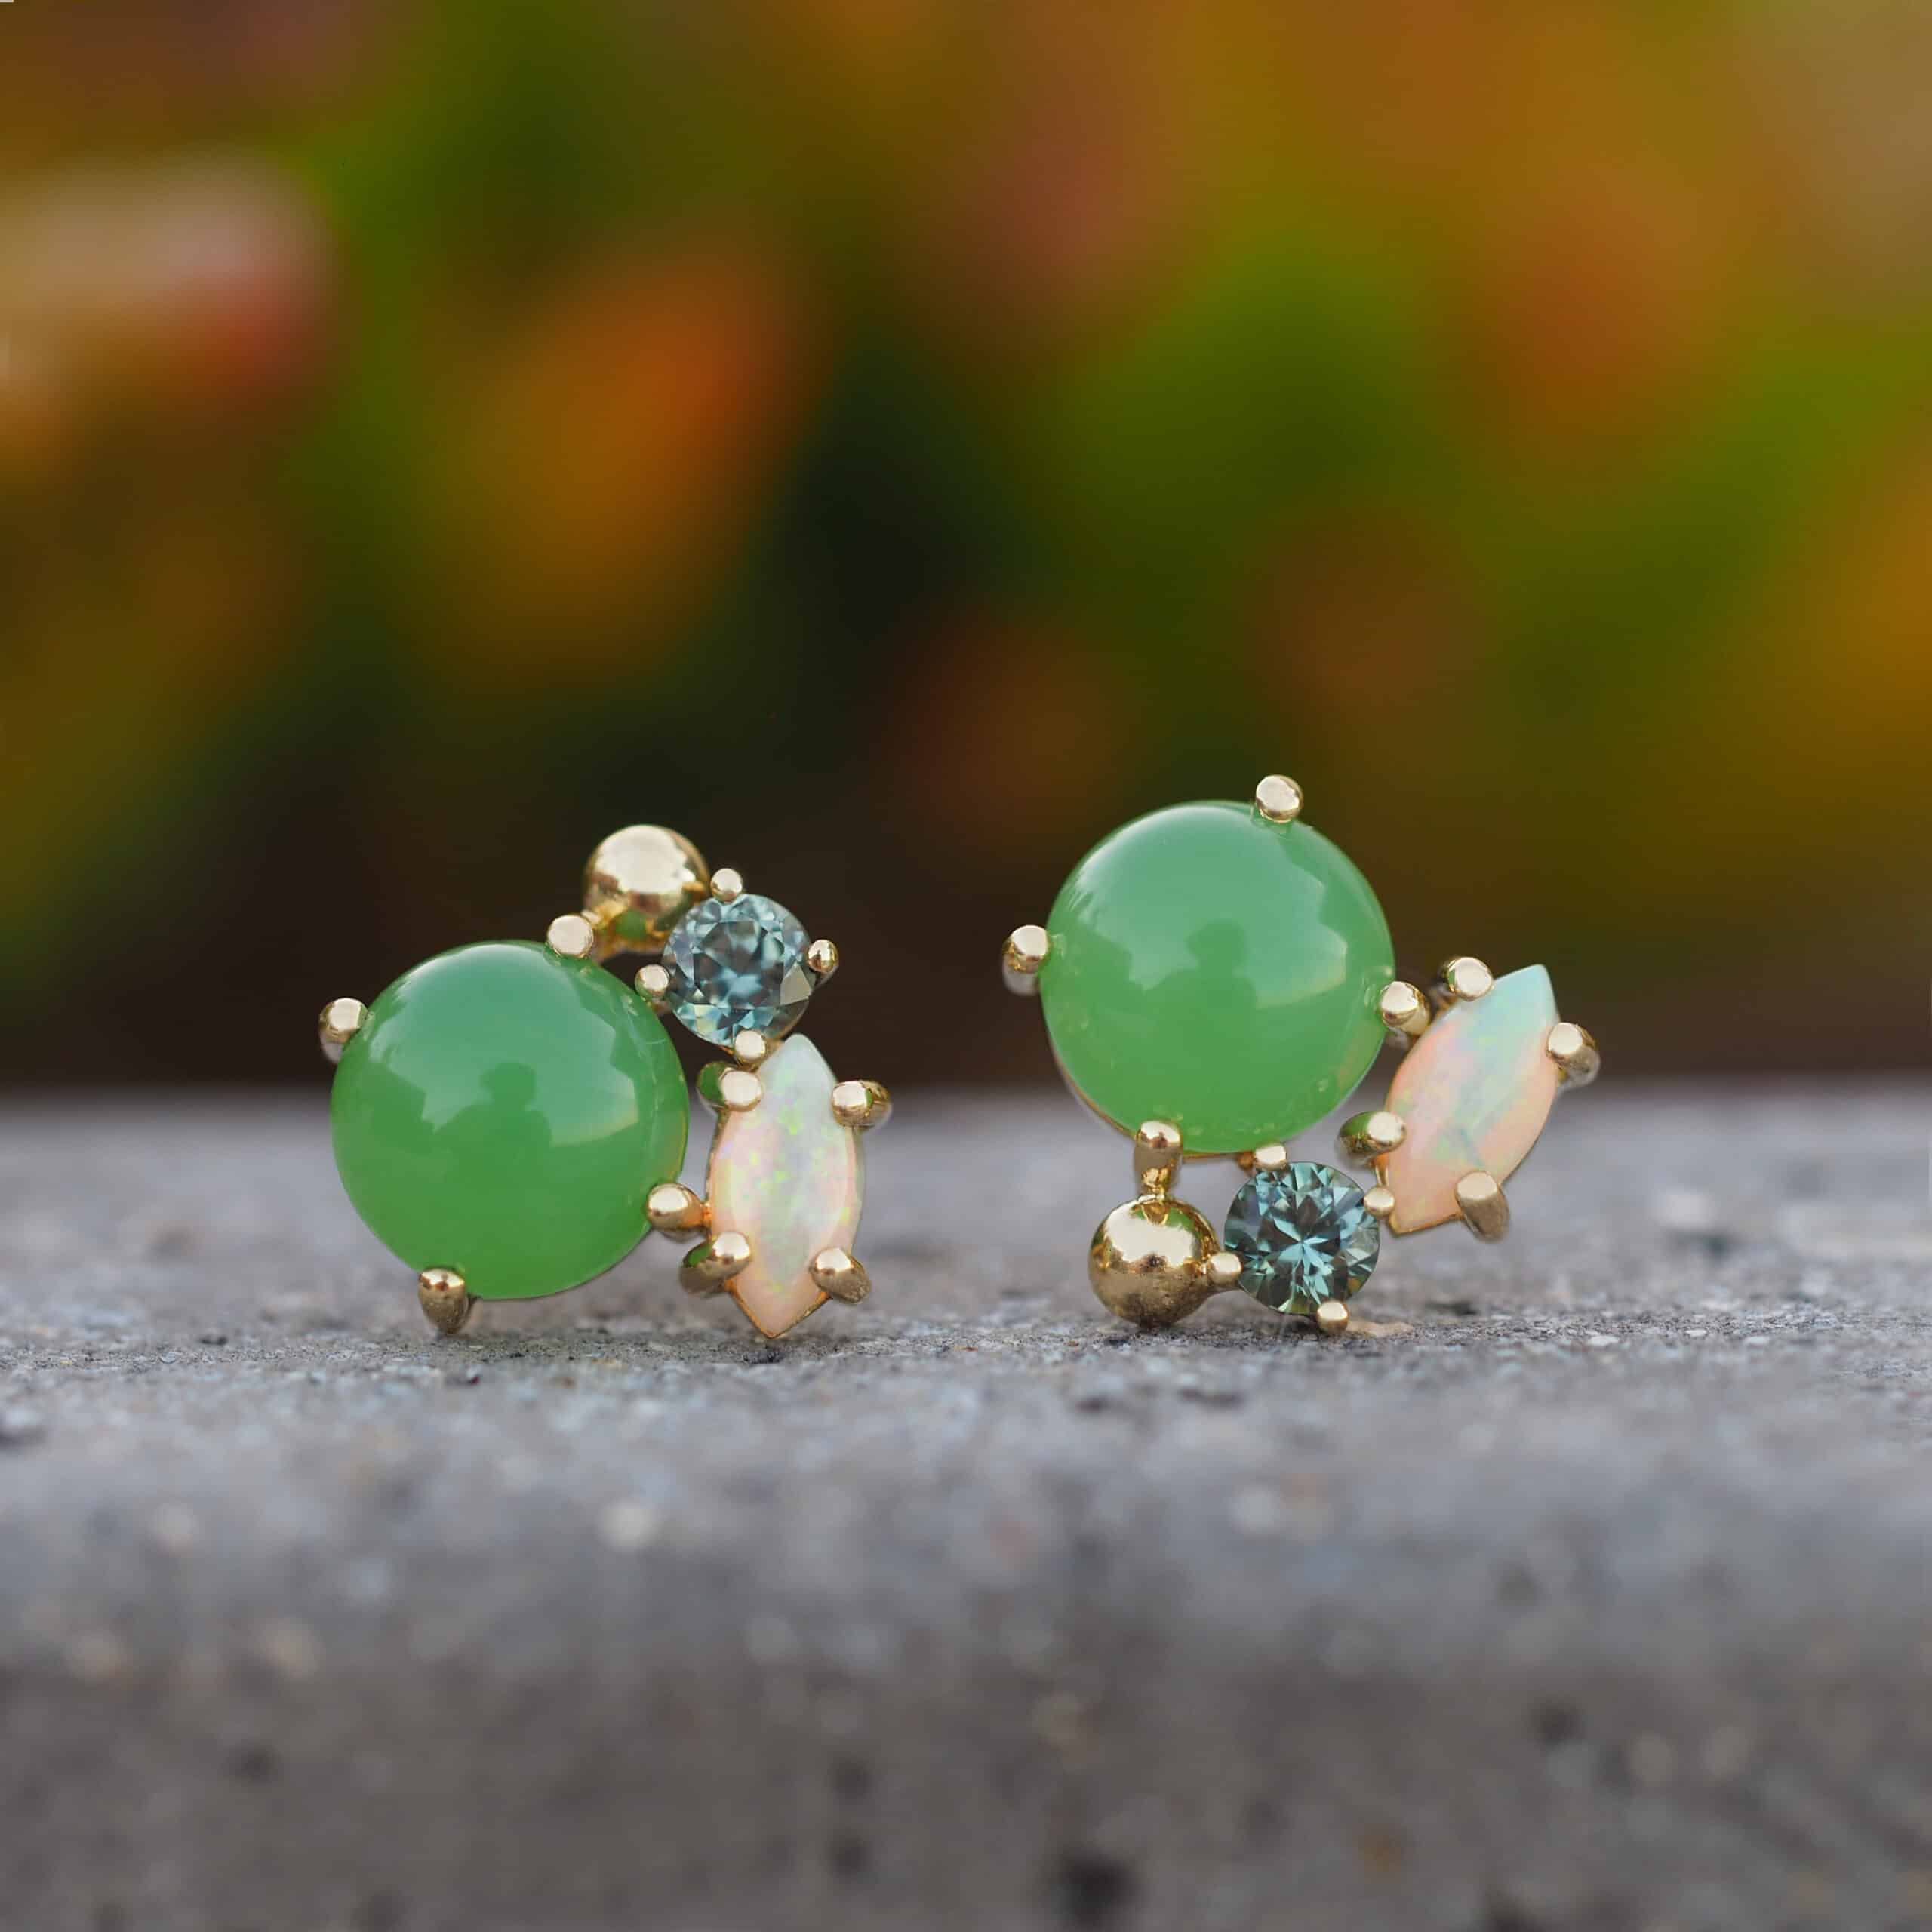 Chrysoprase opal and sapphires cluster earrings by Marina Antoniou